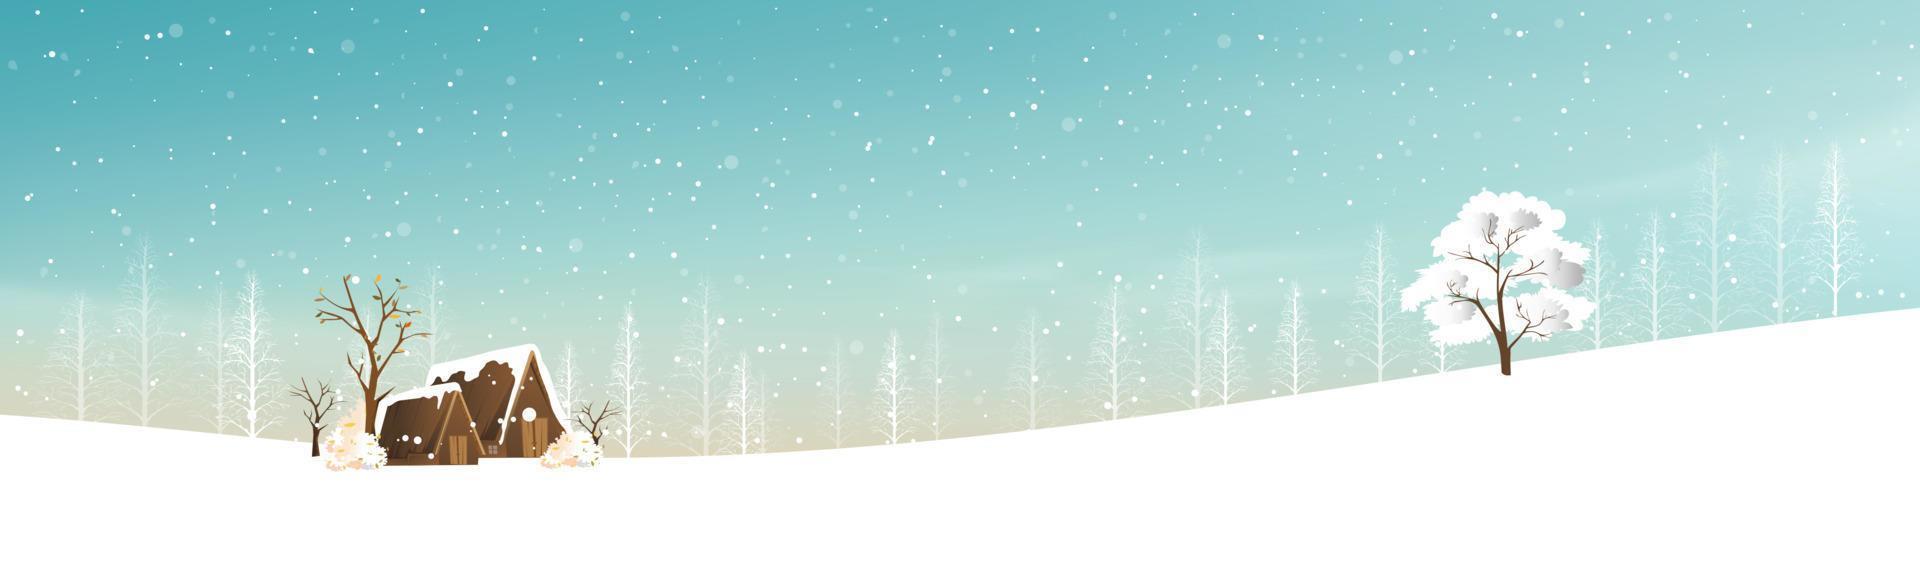 Winter landscape with snowing covring,Vector illustration  wonderland farm house in village with forest pine tree and branches without leaves.Horizontal banner for Christmas holiday or New year 2022 vector